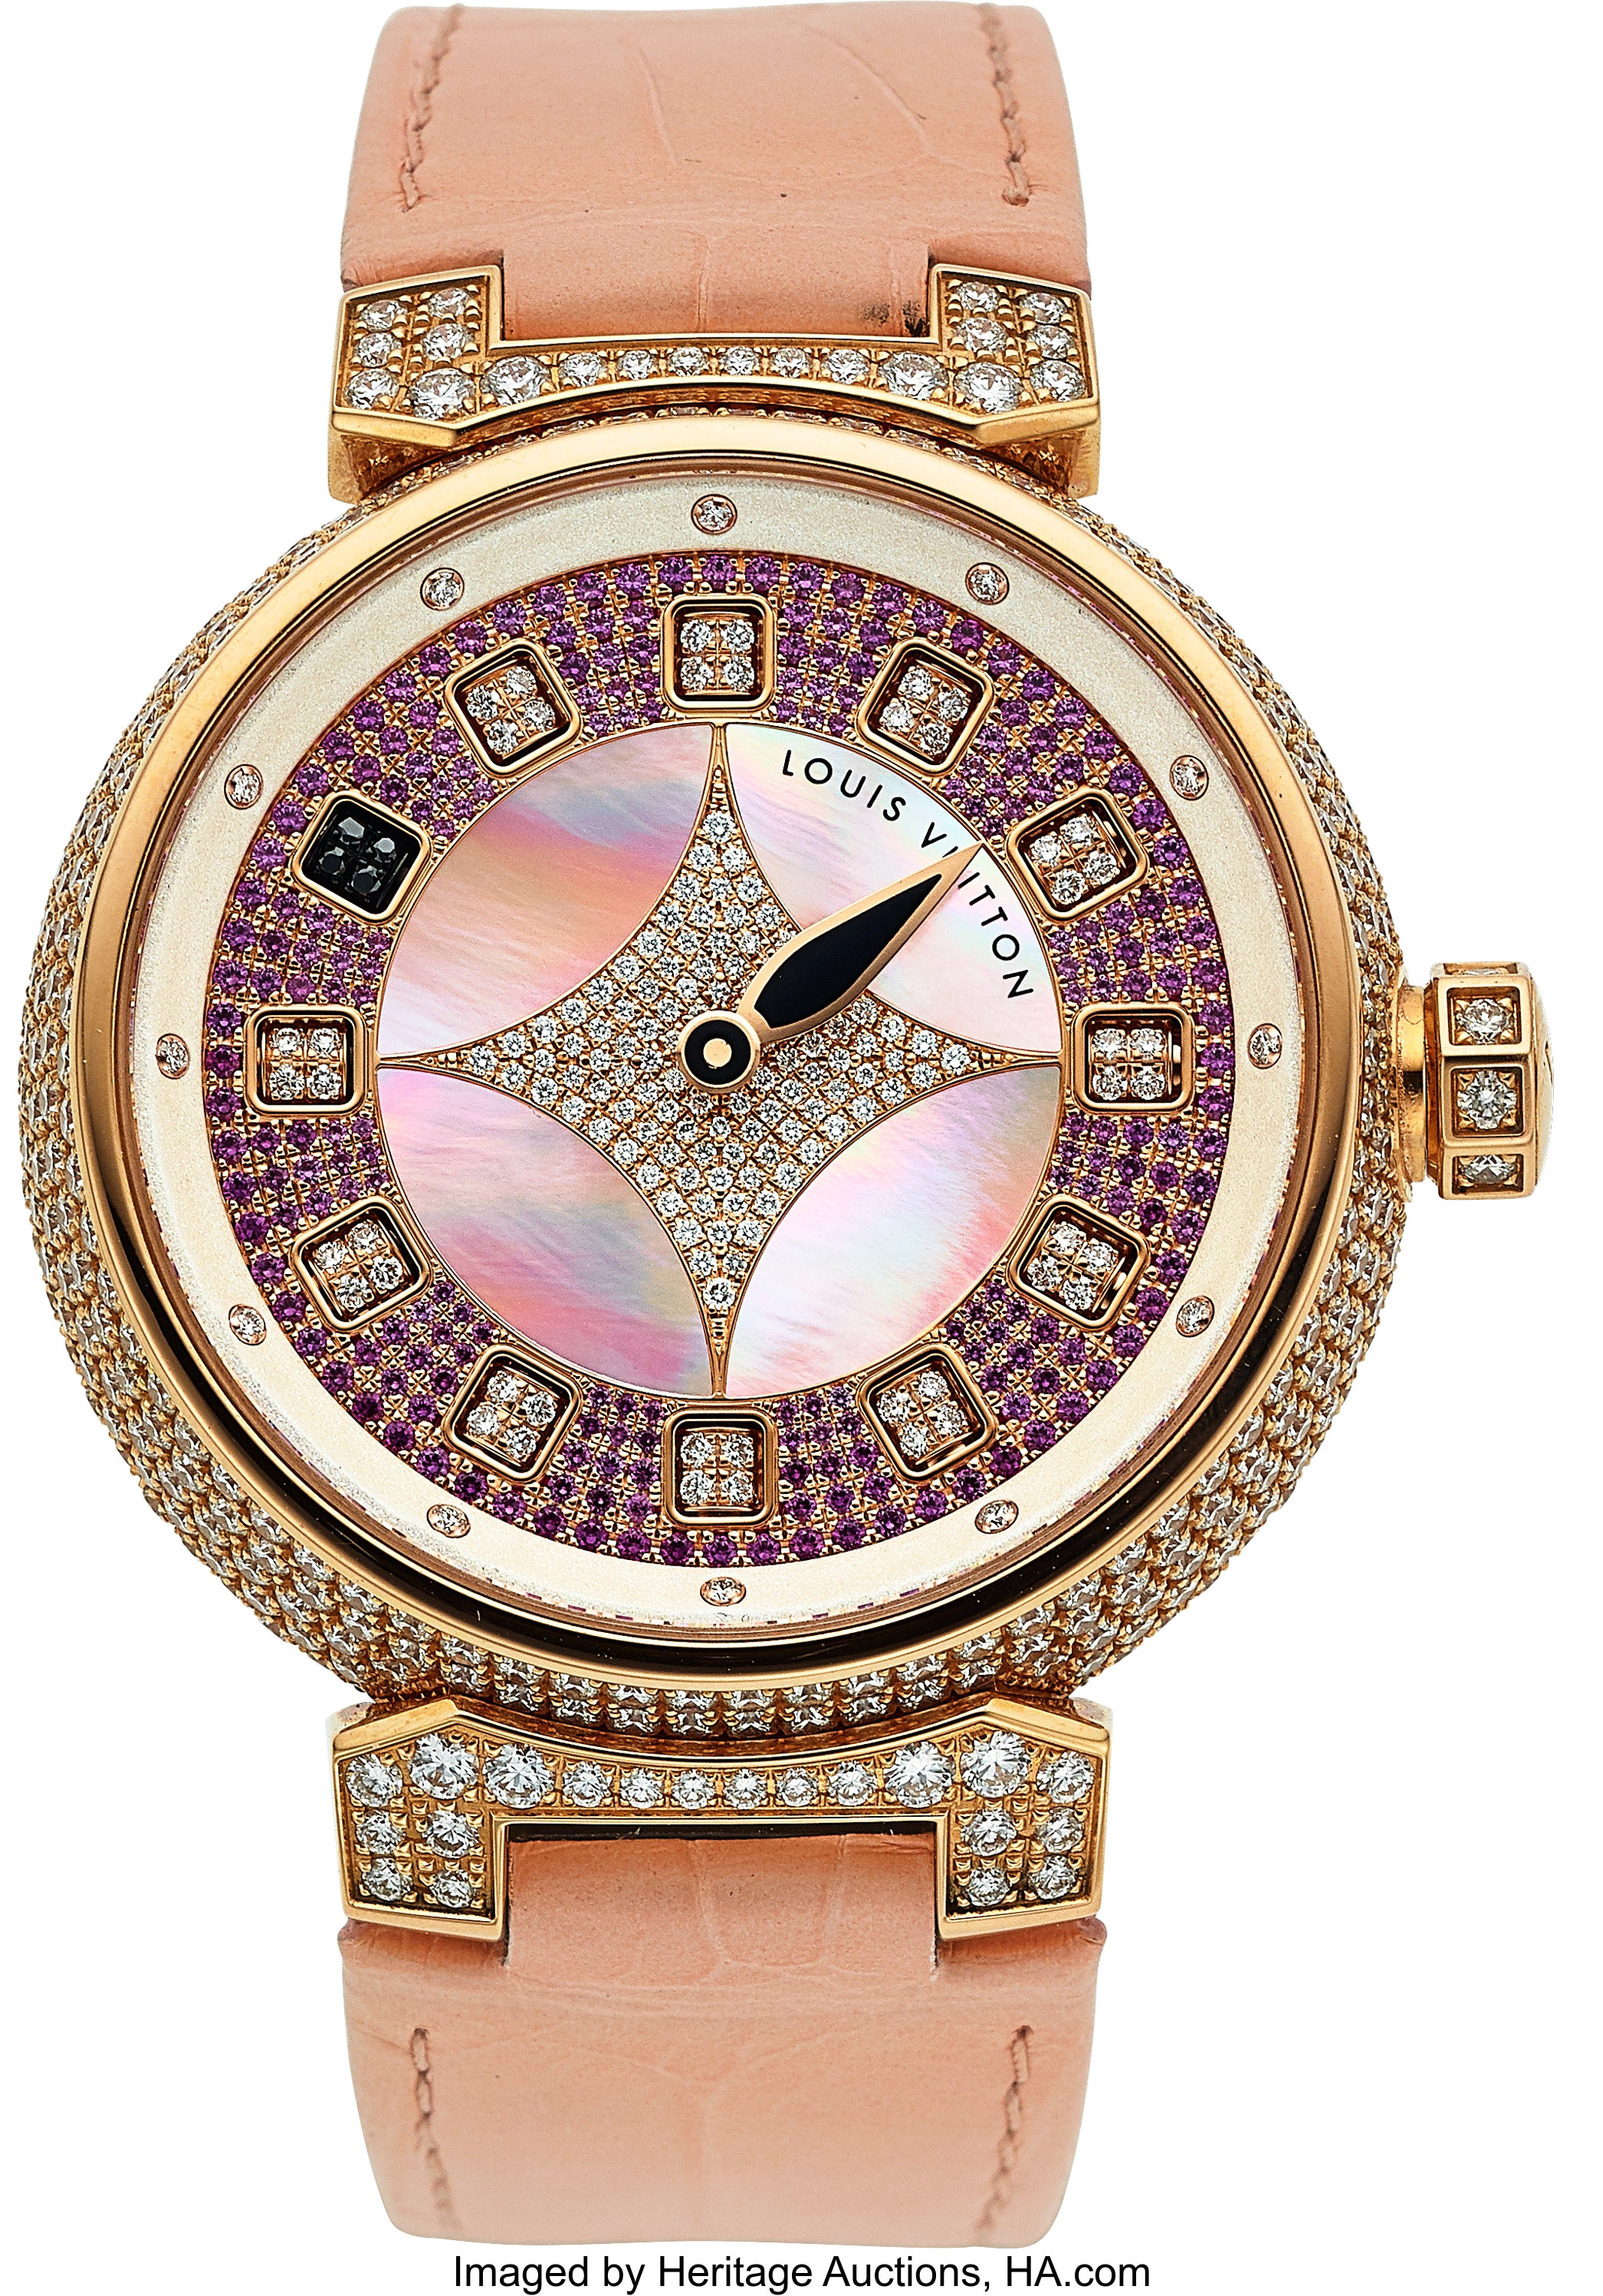 Louis Vuitton, Tambour Spin Time Galaxy, 18k Rose Gold and Pave